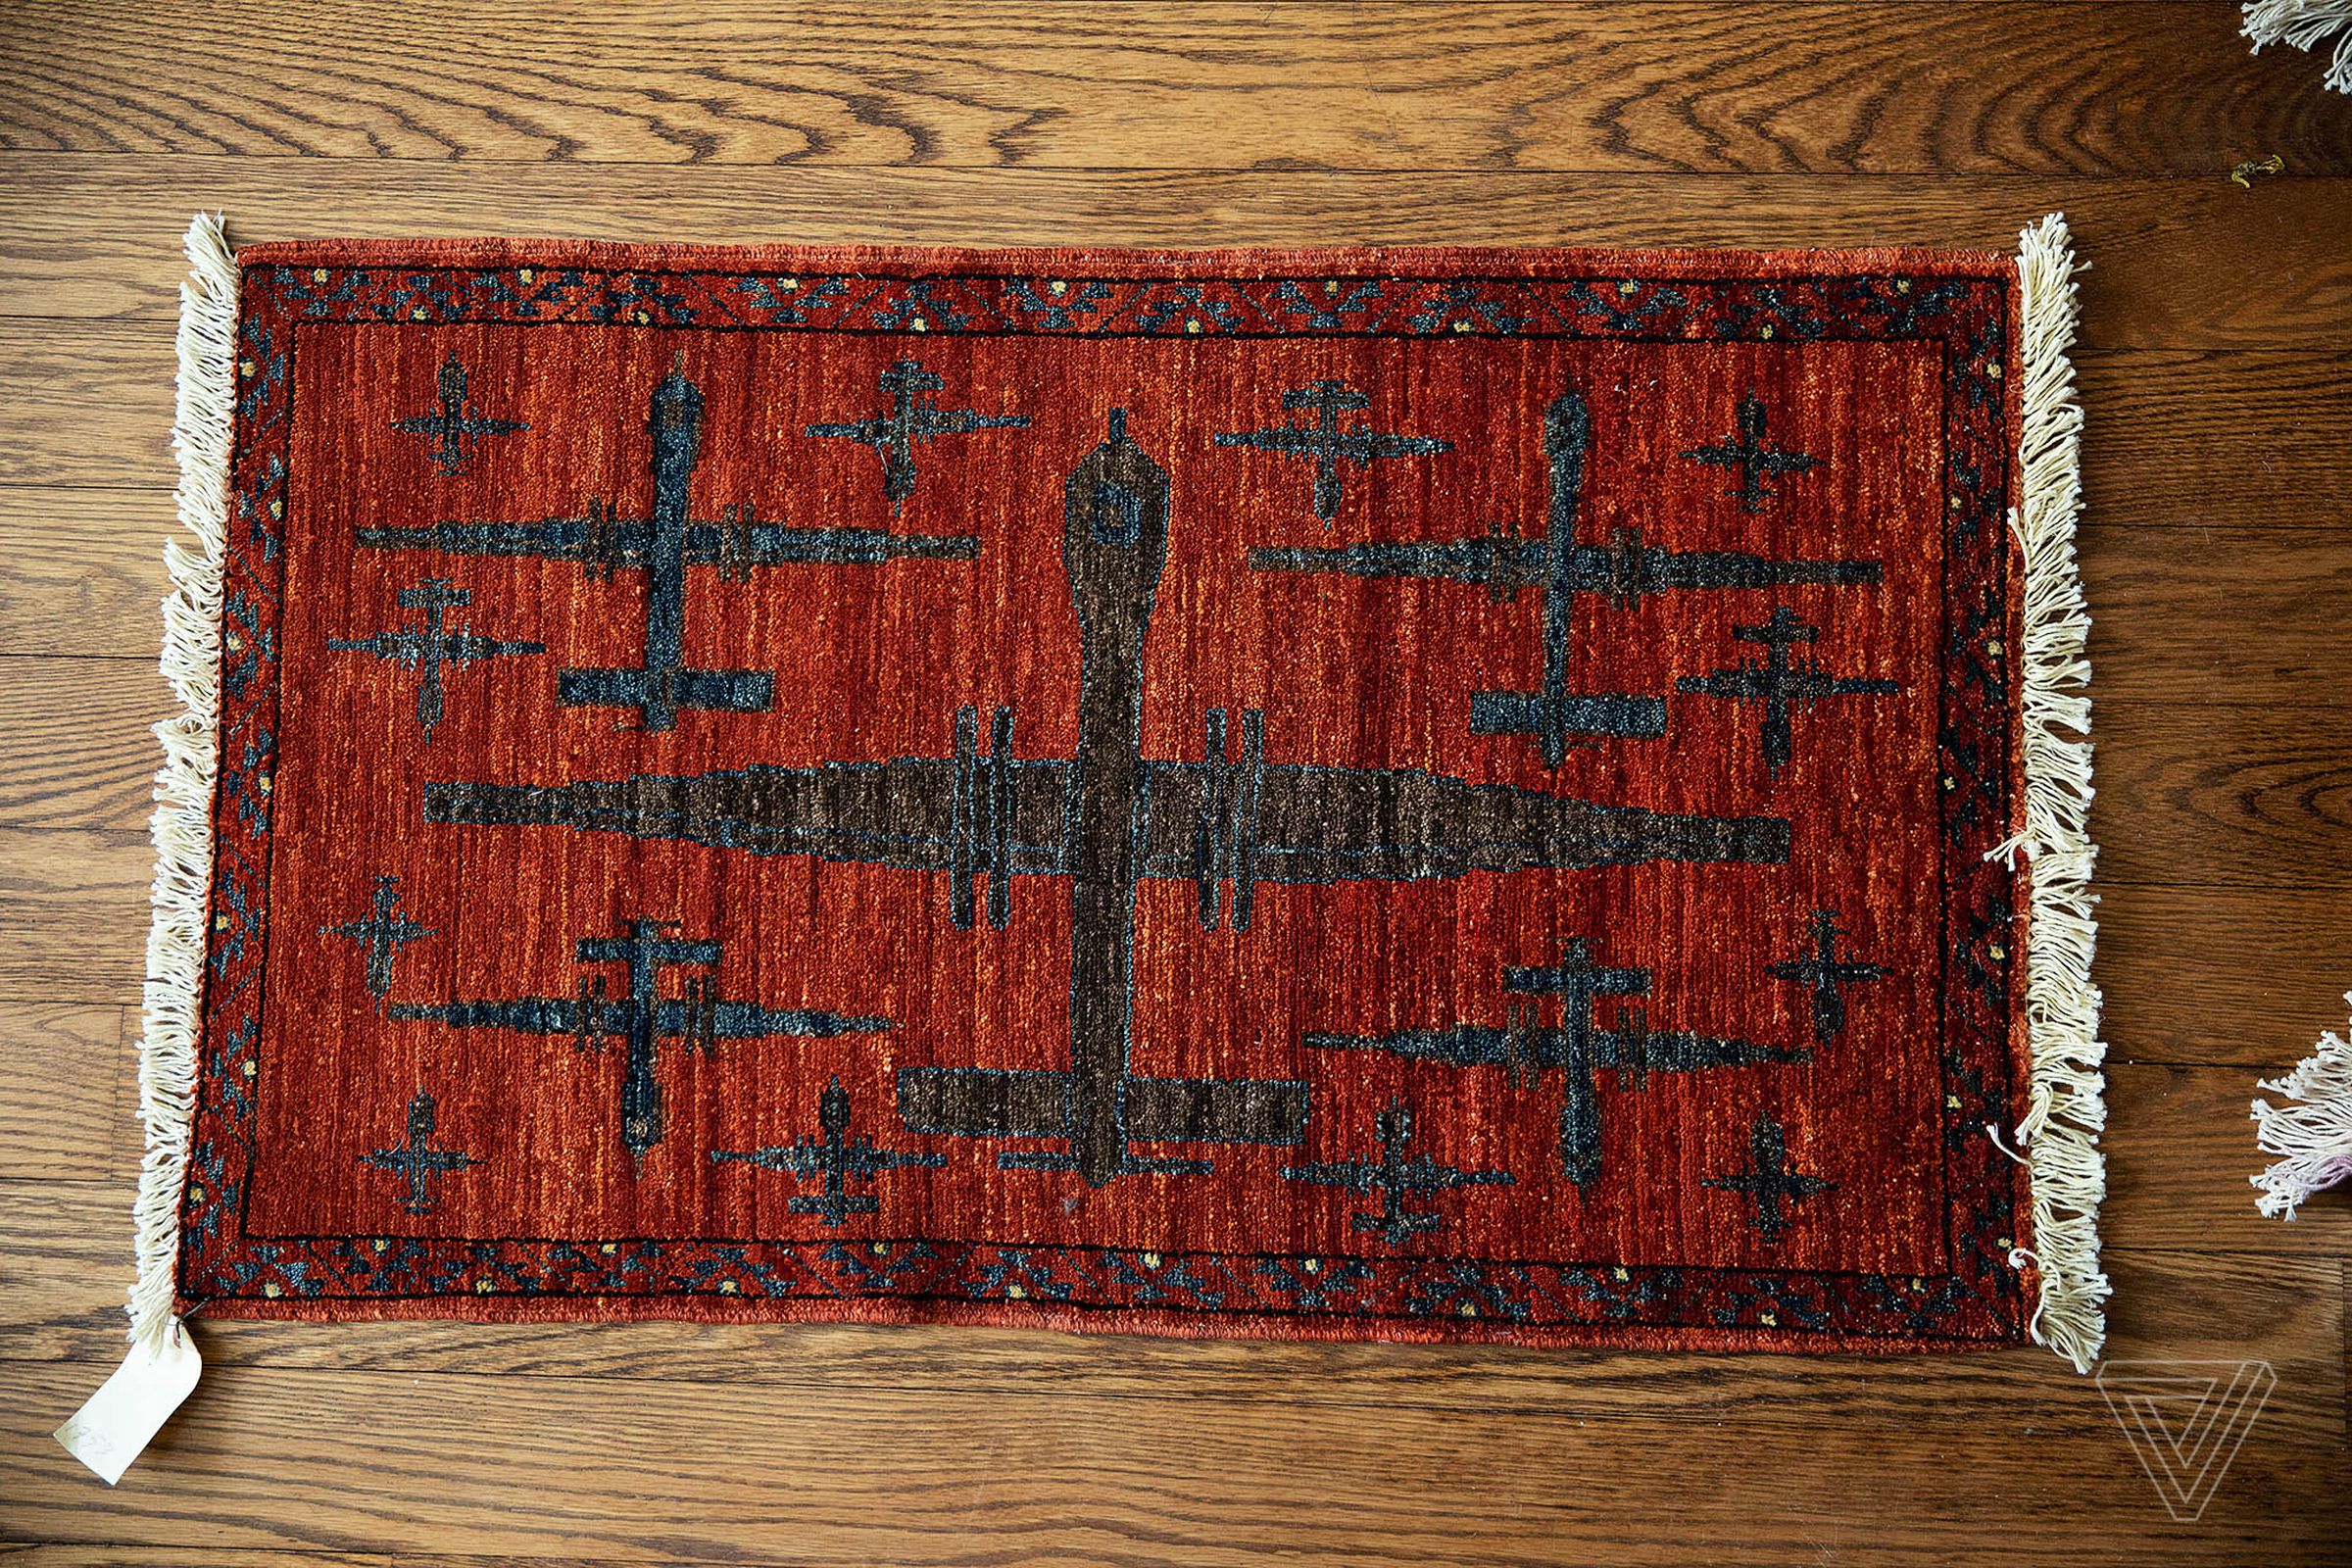 A red rug depicting dark colored drones.